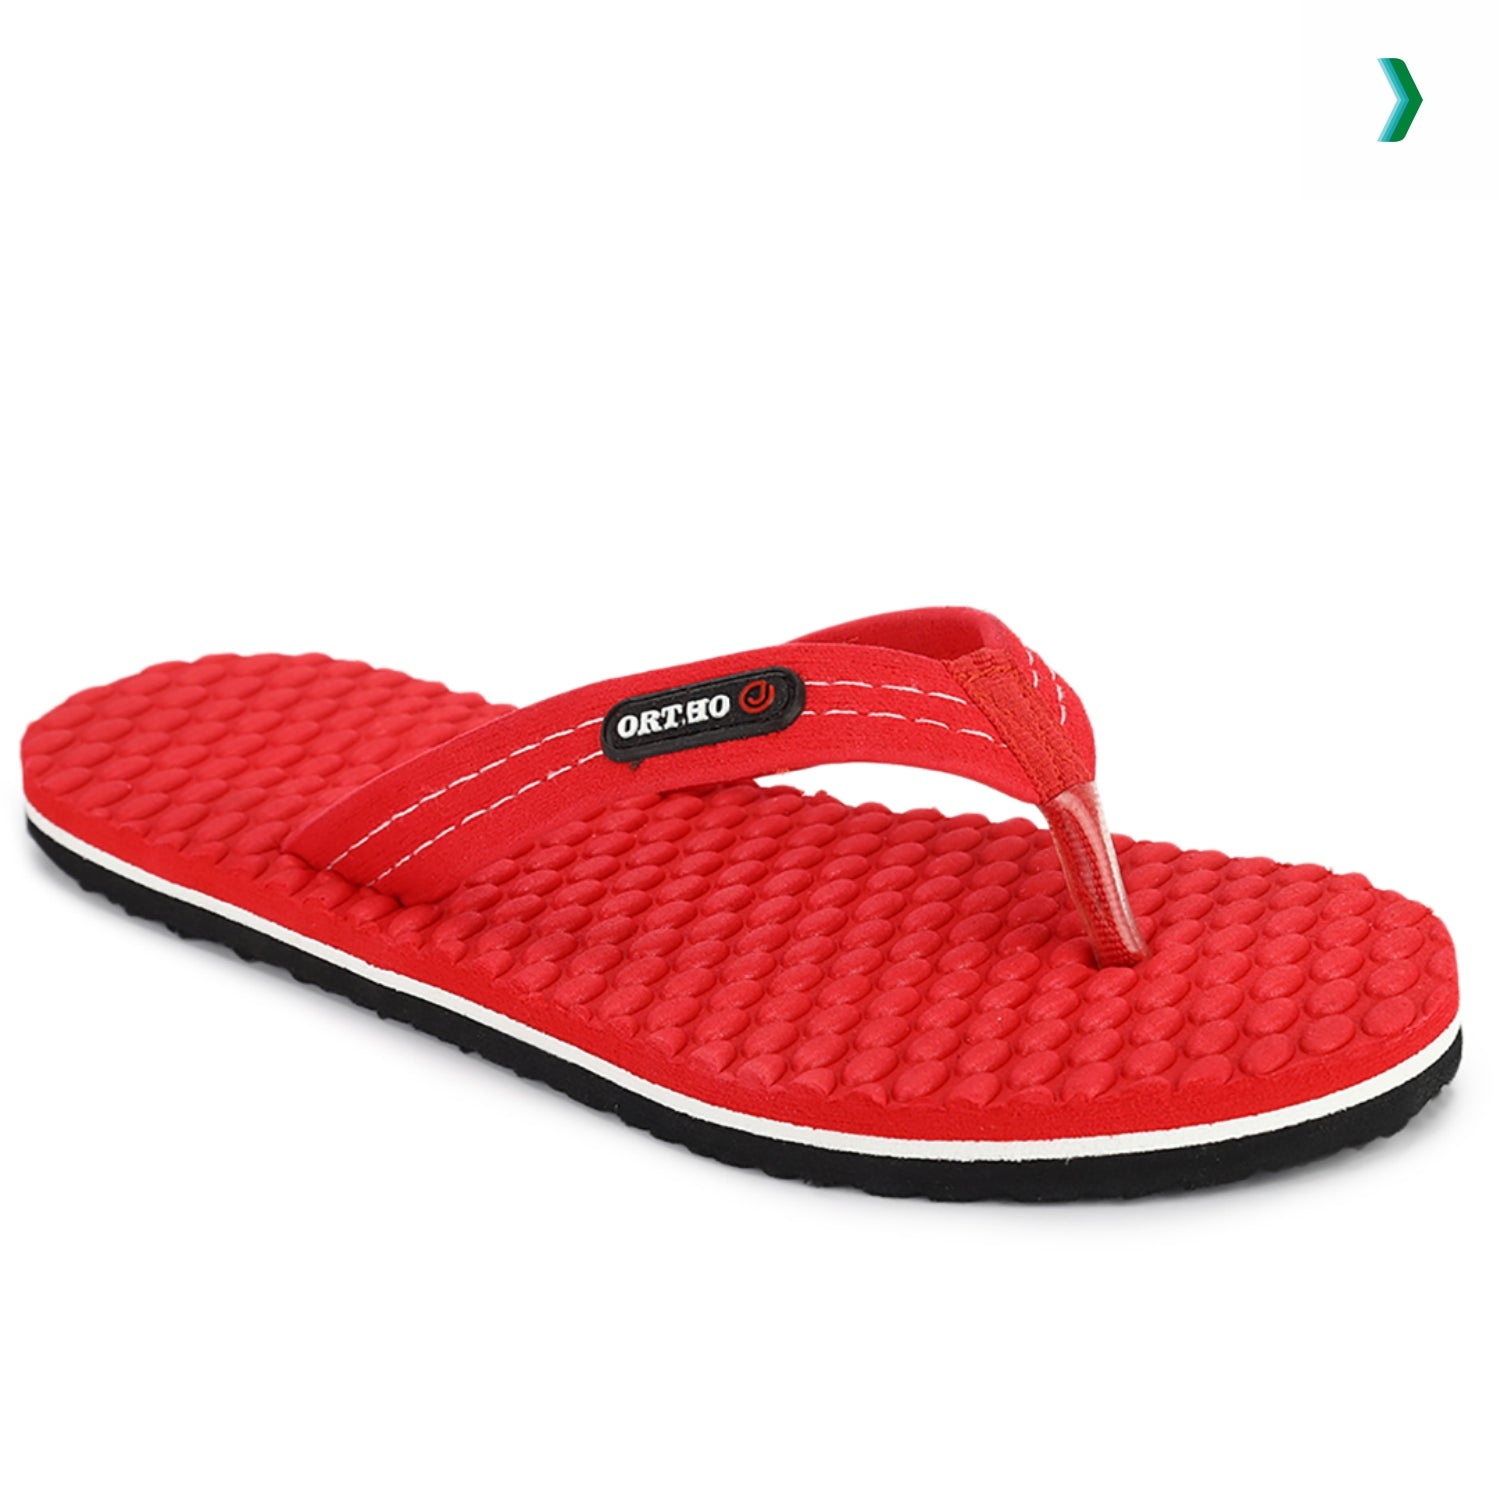 doctor ortho slippers, doctor extra soft slippers, ortho slippers, ortho slippers for women, orthopedic slippers for women, ortho chappal, orthopaedic slippers, ortho chappal for ladies, ortho slippers for ladies